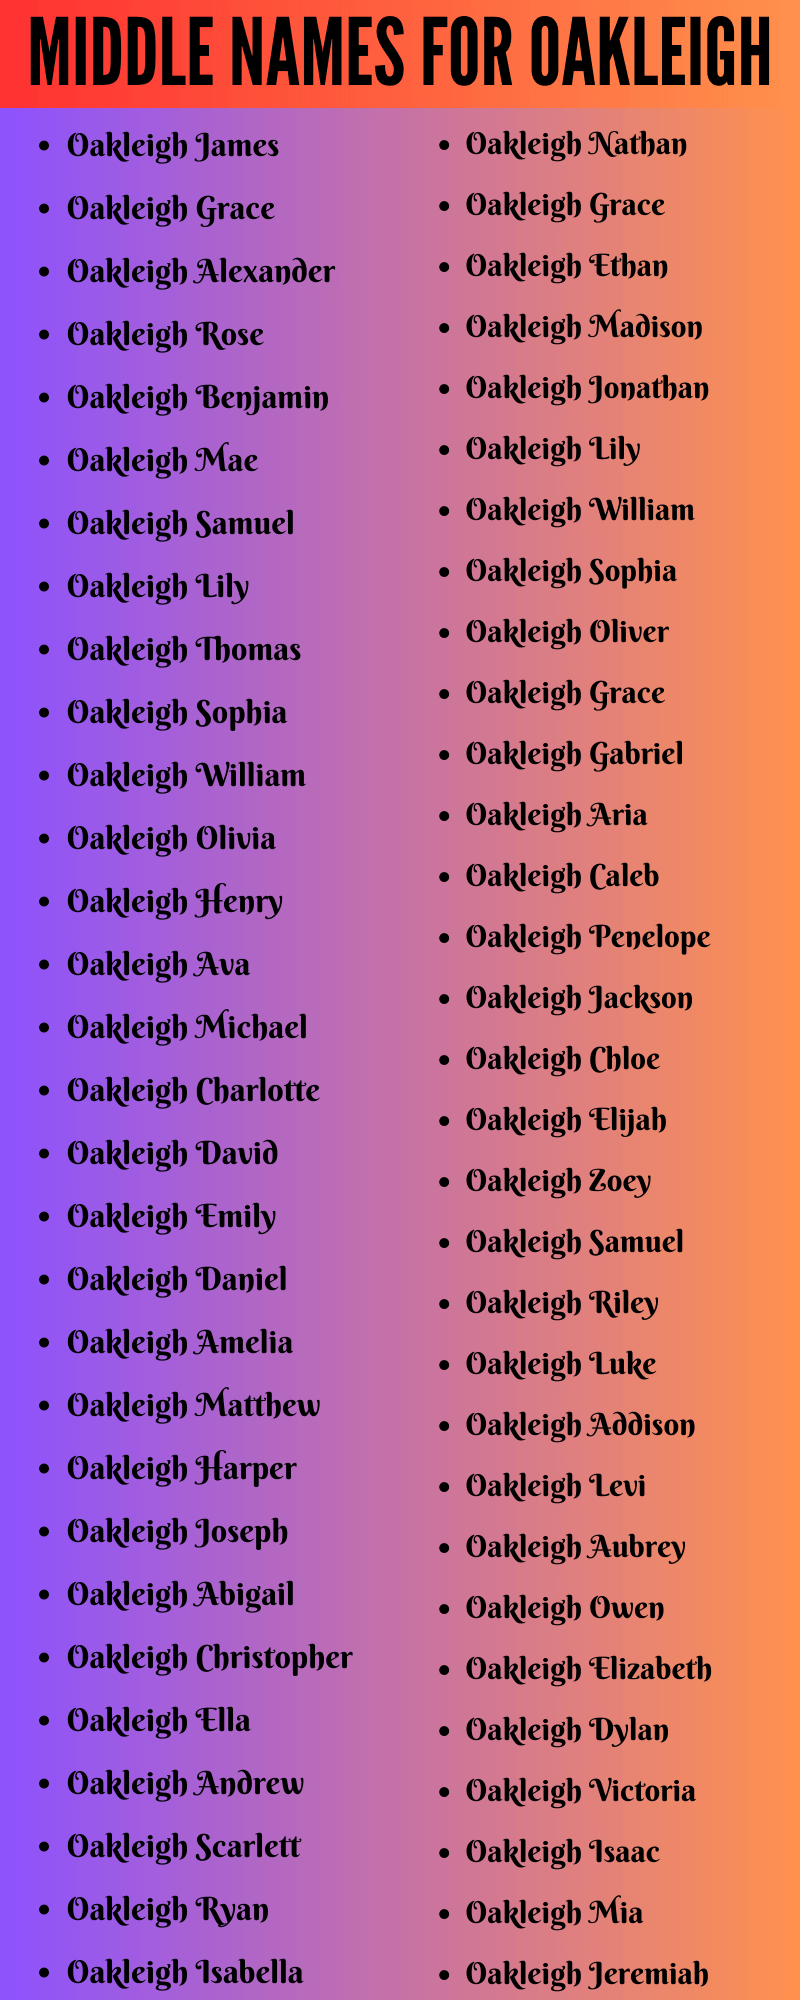 400 Amazing Middle Names For Oakleigh